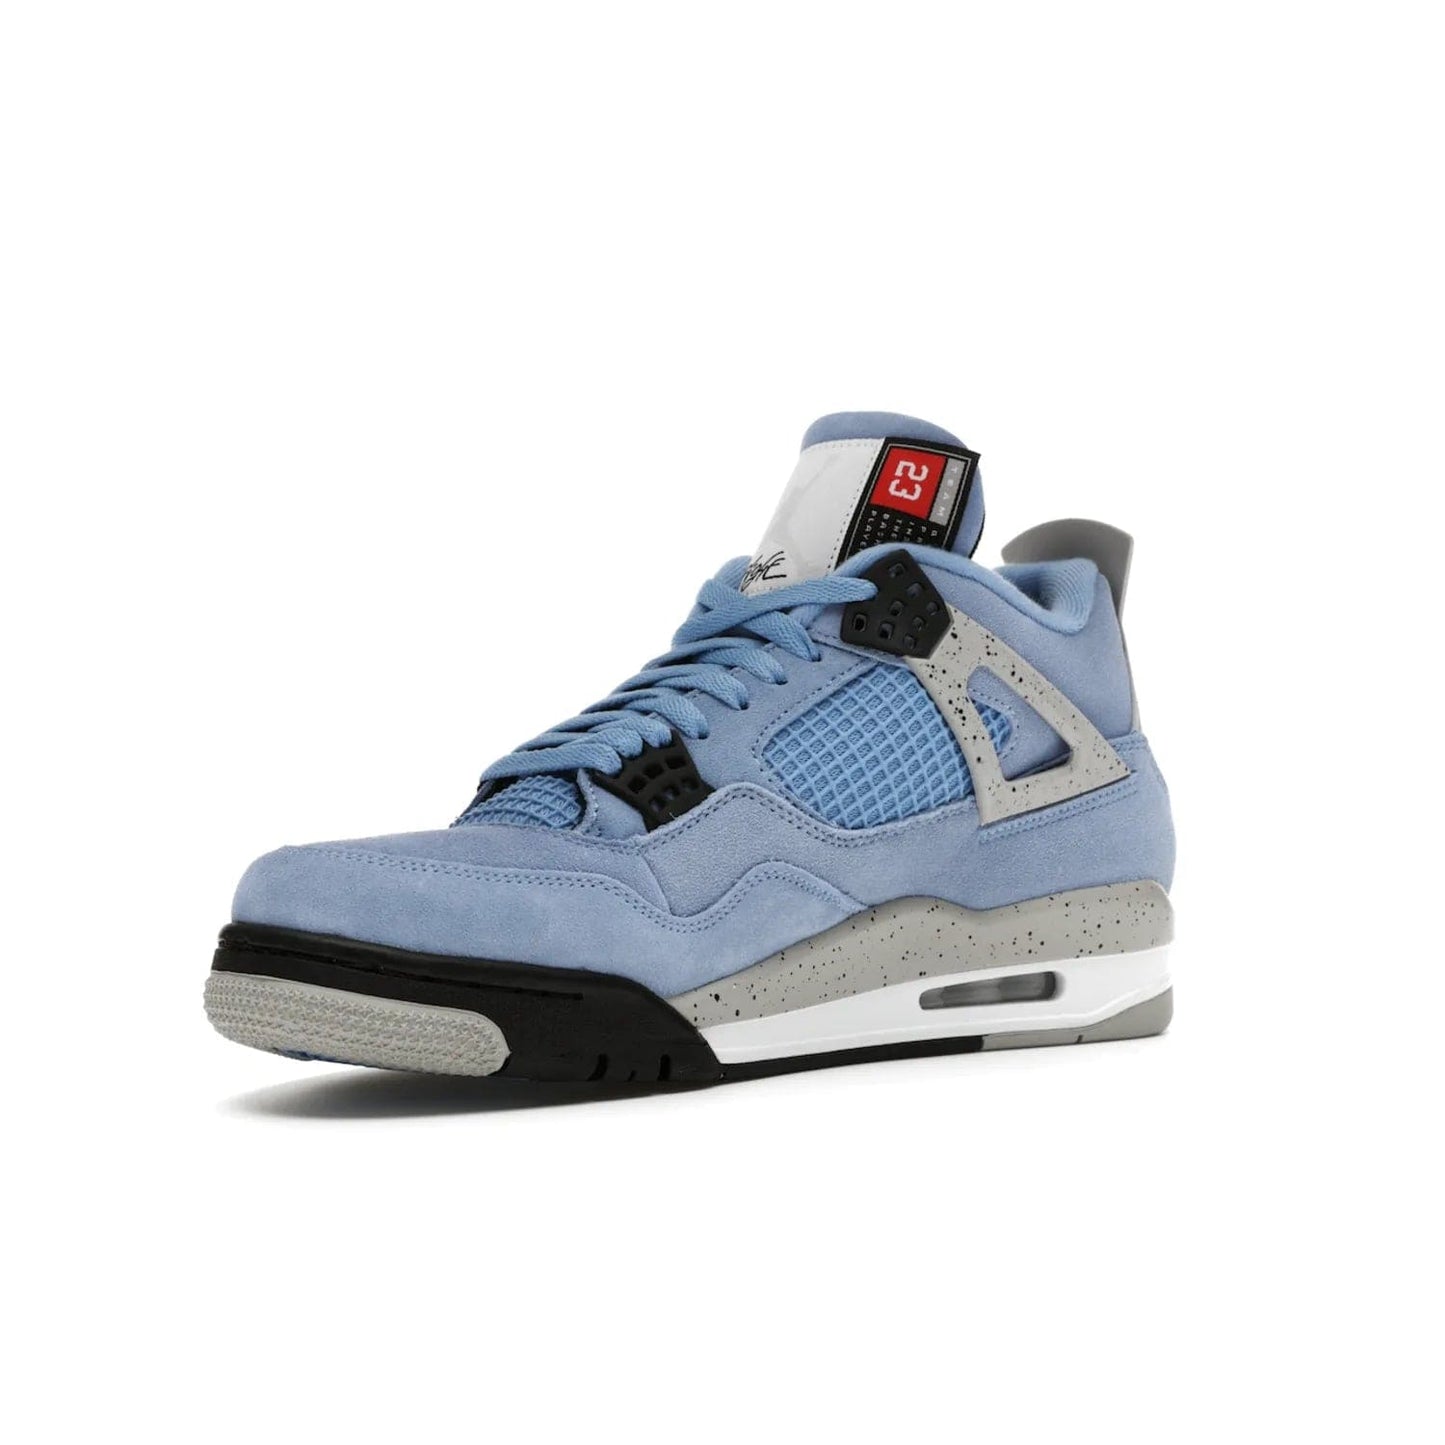 Jordan 4 Retro University Blue - Image 15 - Only at www.BallersClubKickz.com - The Air Jordan 4 University Blue honors MJ's alma mater. Rich University Blue suede, panels of netting, and Cement Grey speckled eyelets give this design an edgy look. Features a black, white and Tech Grey sole with a clear Air unit and two woven labels on the tongue. Jumpman logo & Team Jordan jock tag included. Released April 2021.